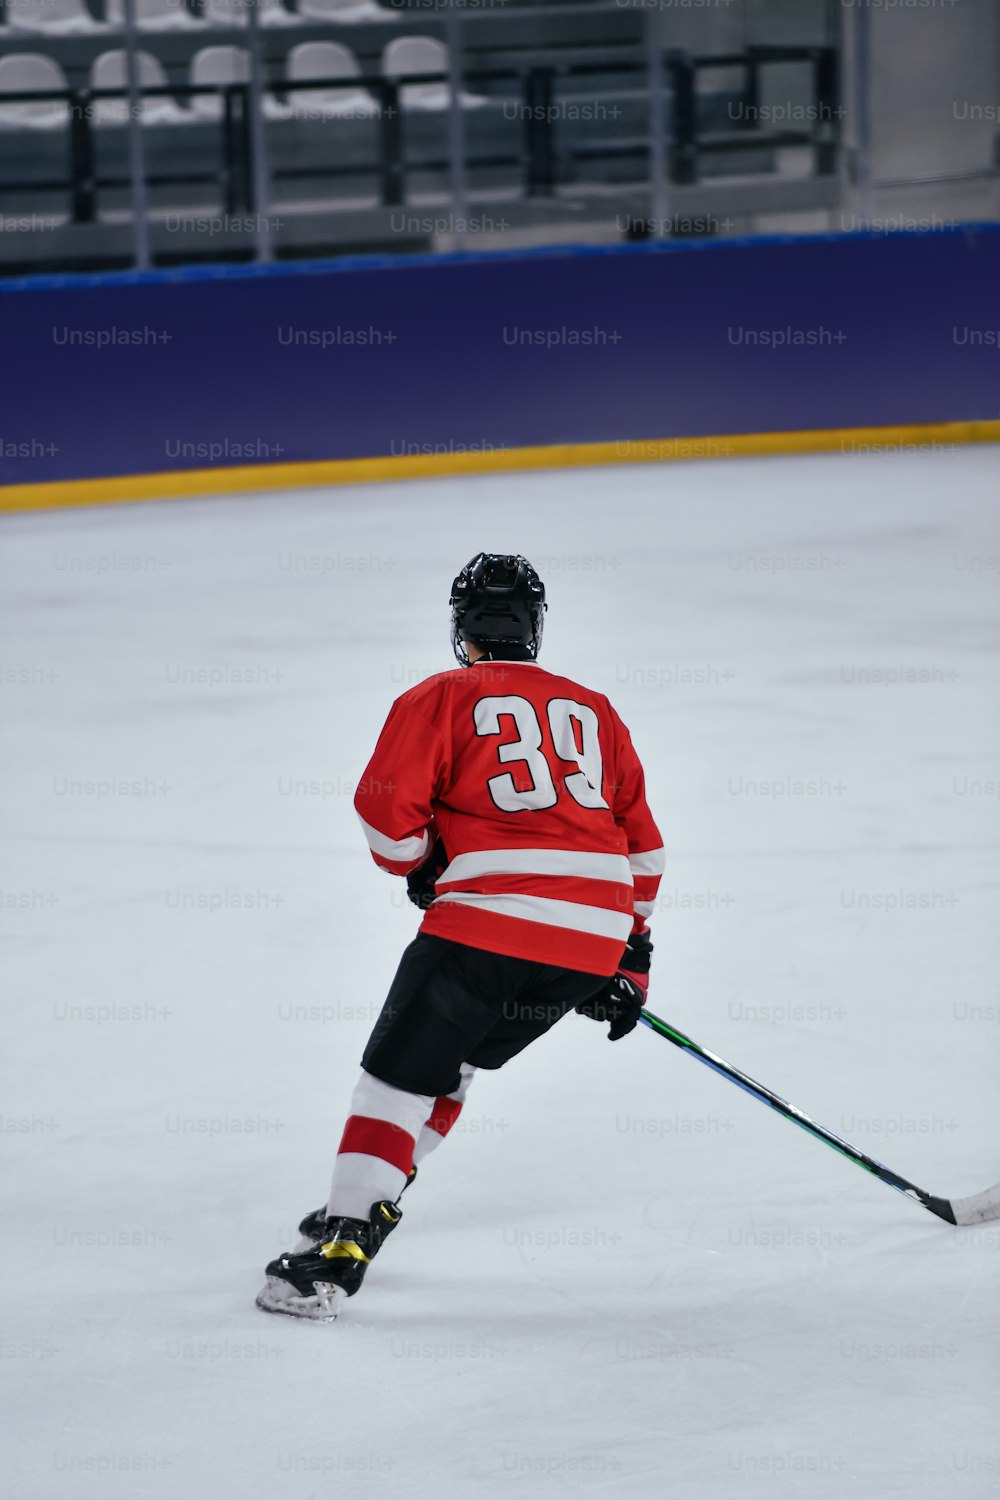 a hockey player in a red jersey skating on an ice rink